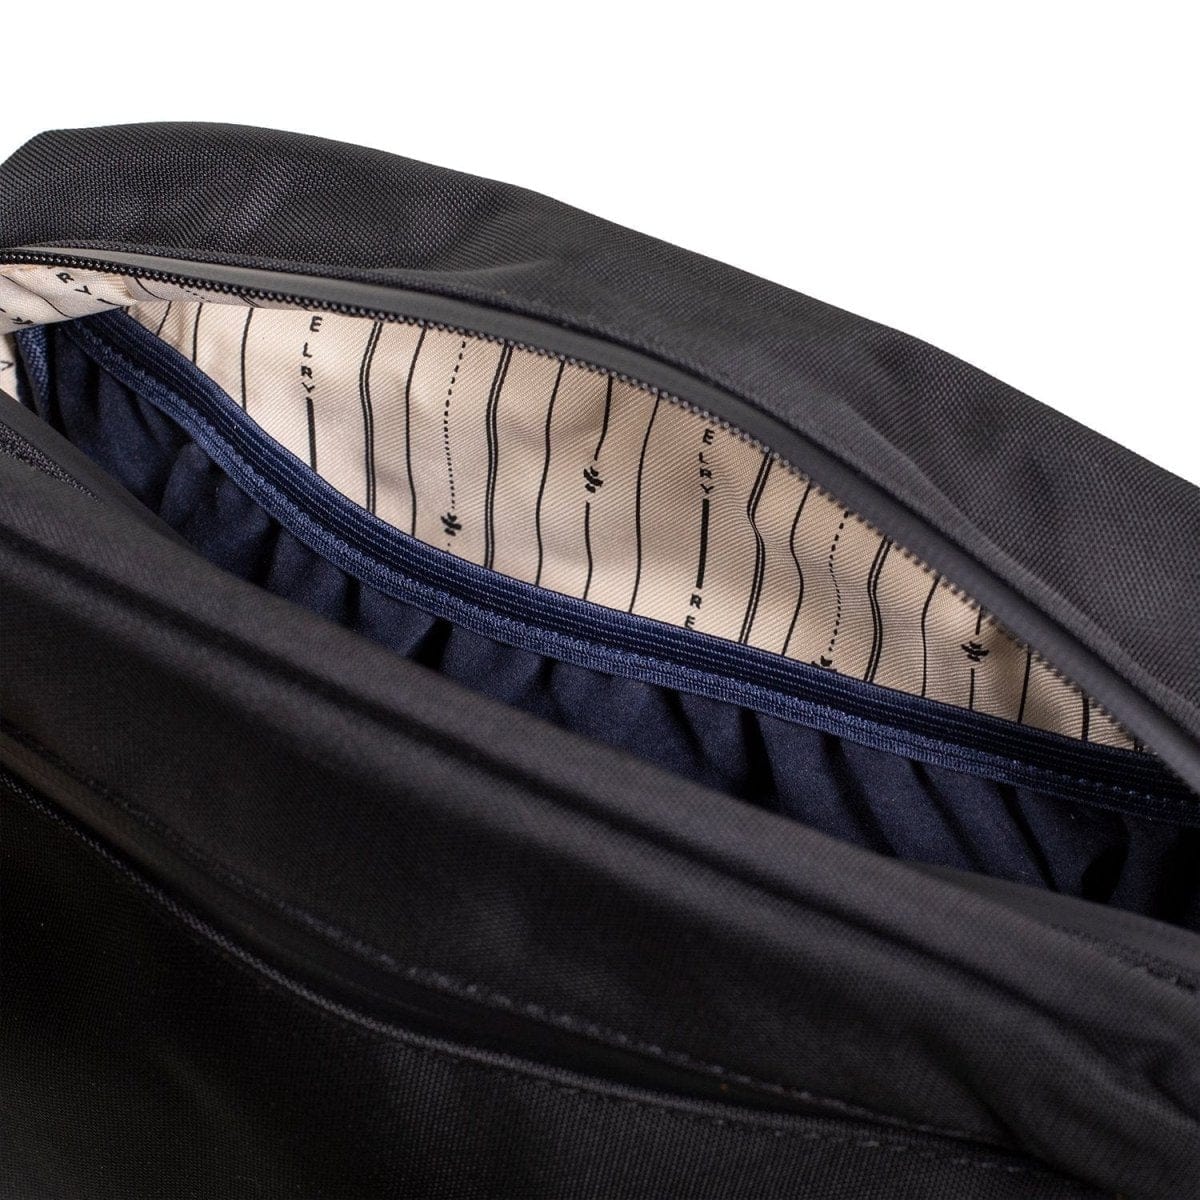 Revelry Supply Travel Bag The Stowaway - Smell Proof Toiletry Kit